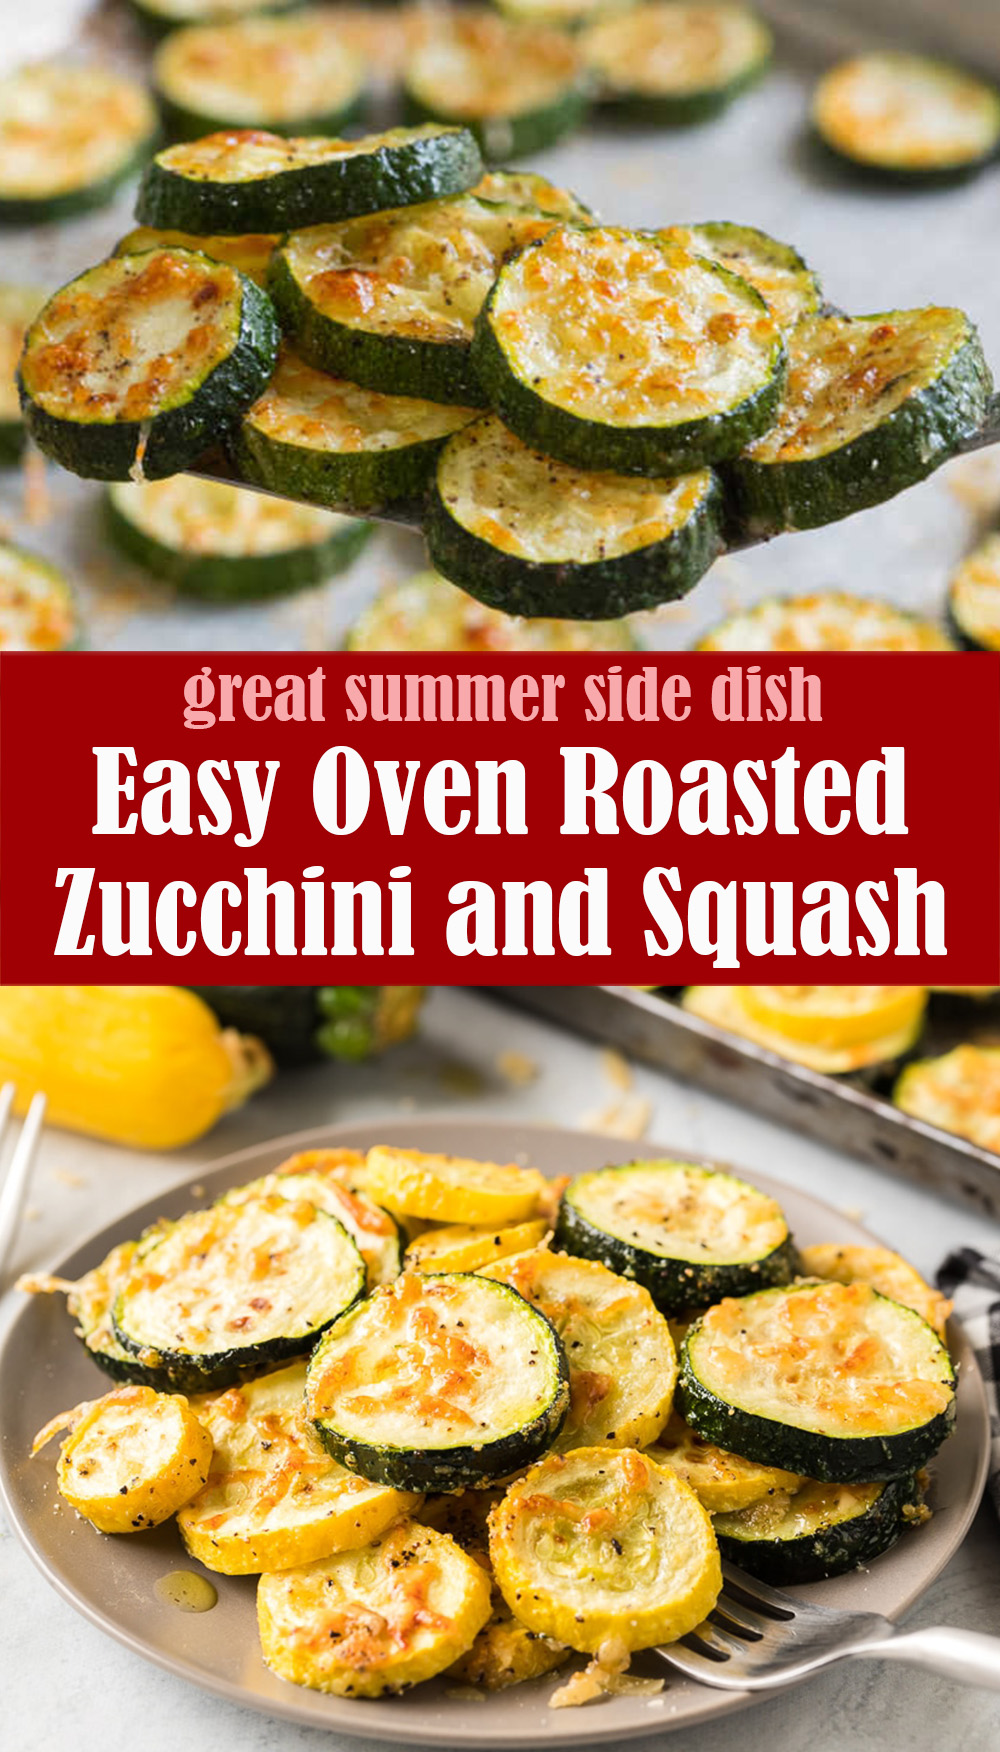 Easy Oven Roasted Zucchini and Squash